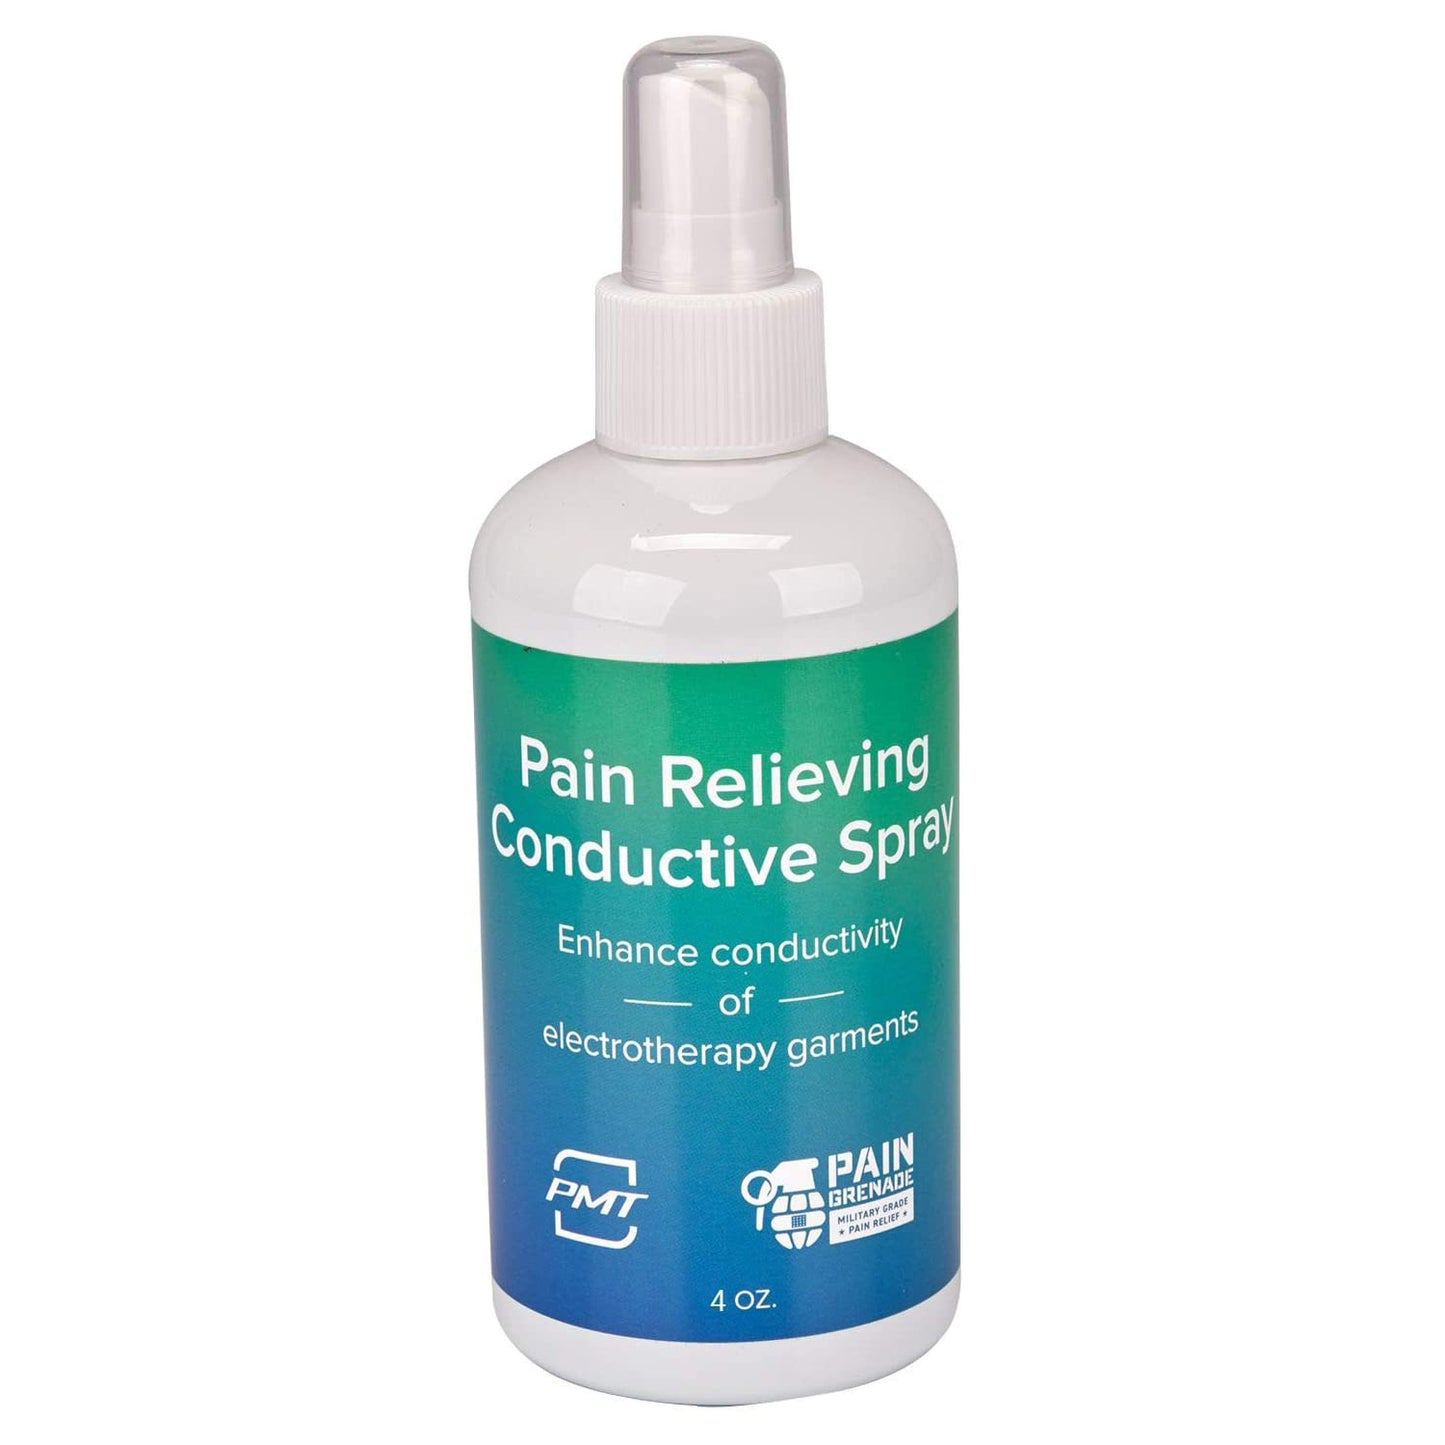 Pain Relieving Conductive Spray - 4 Oz